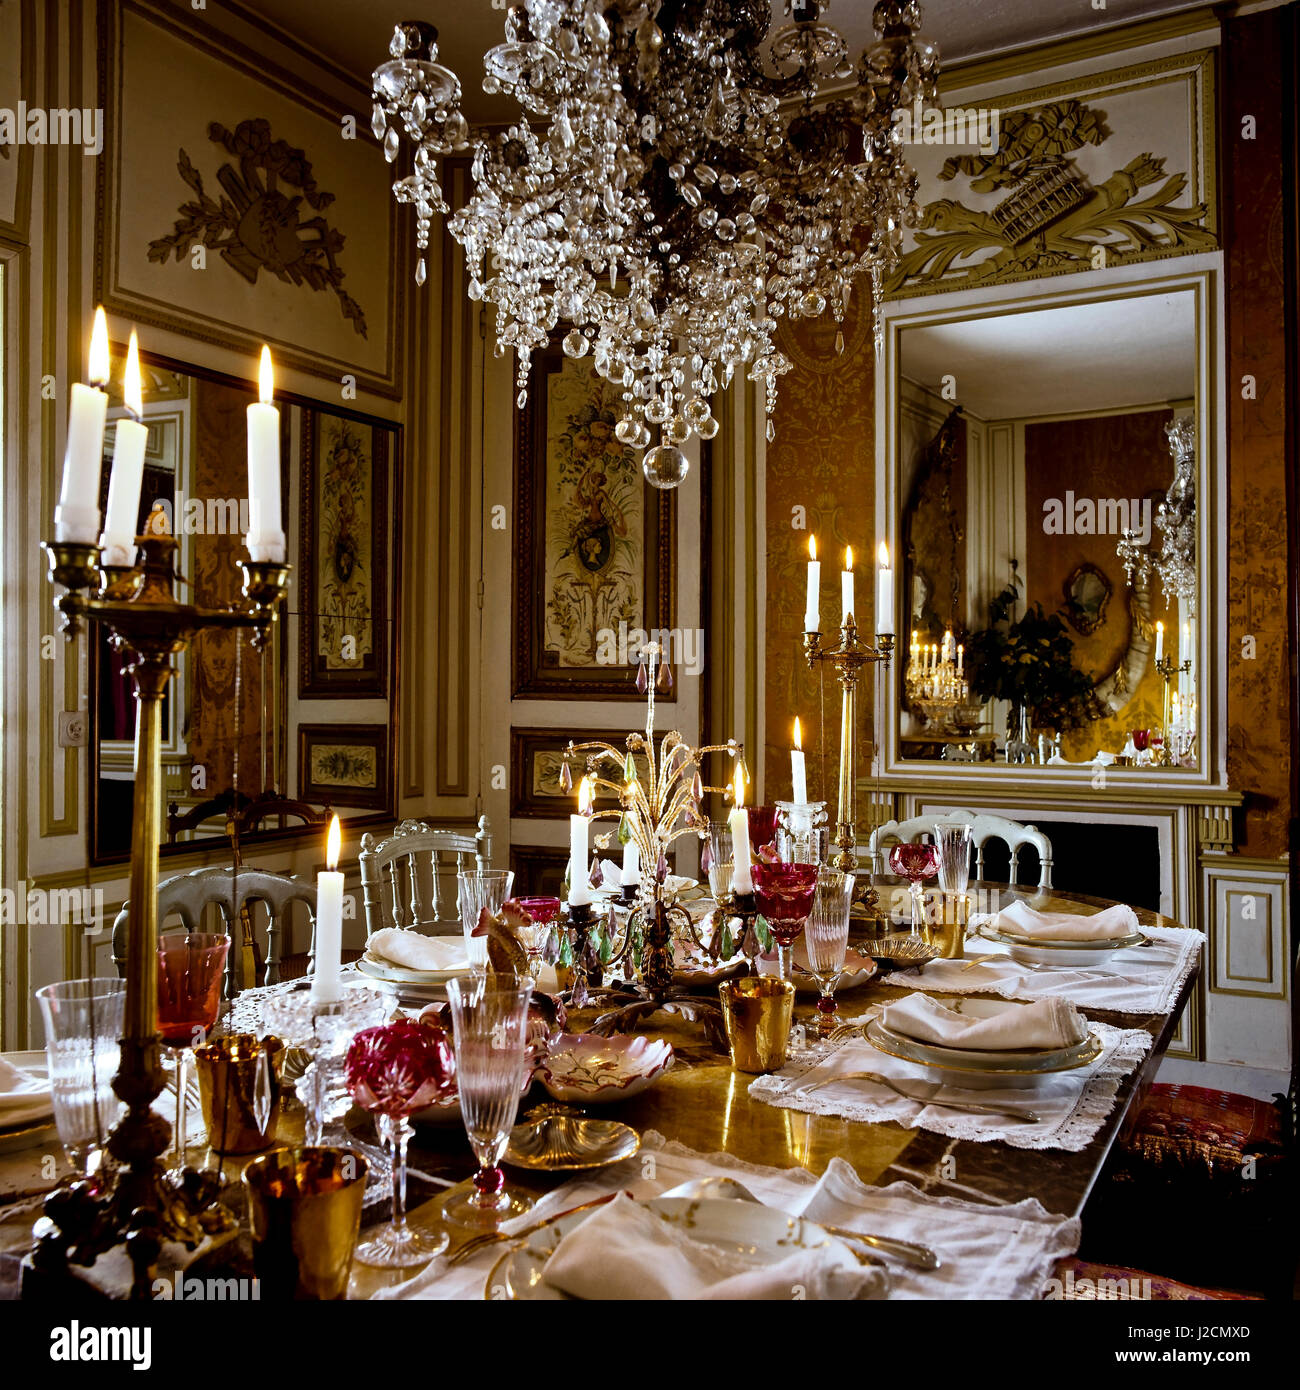 An opulent dining room. Stock Photo